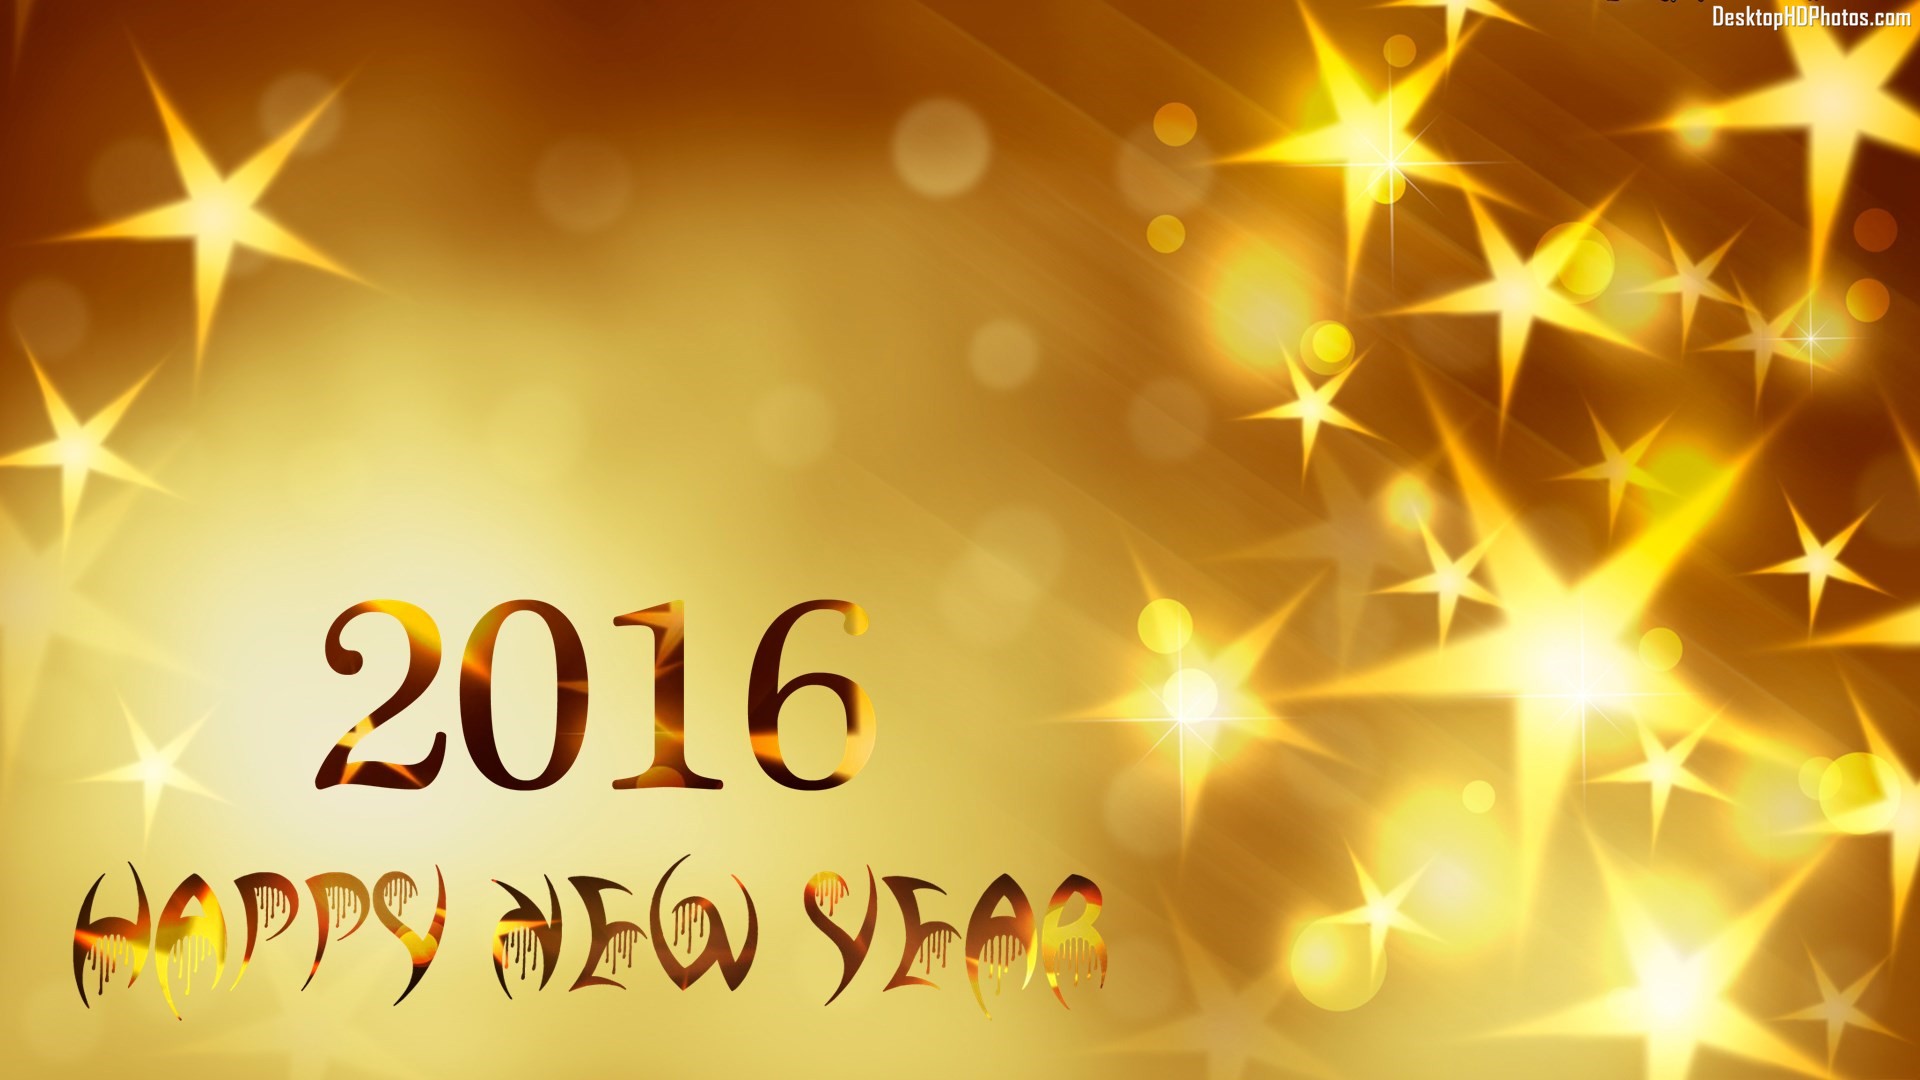 2016 Happy New Years Wallpaper - Happy New Year Background Banner - HD Wallpaper 